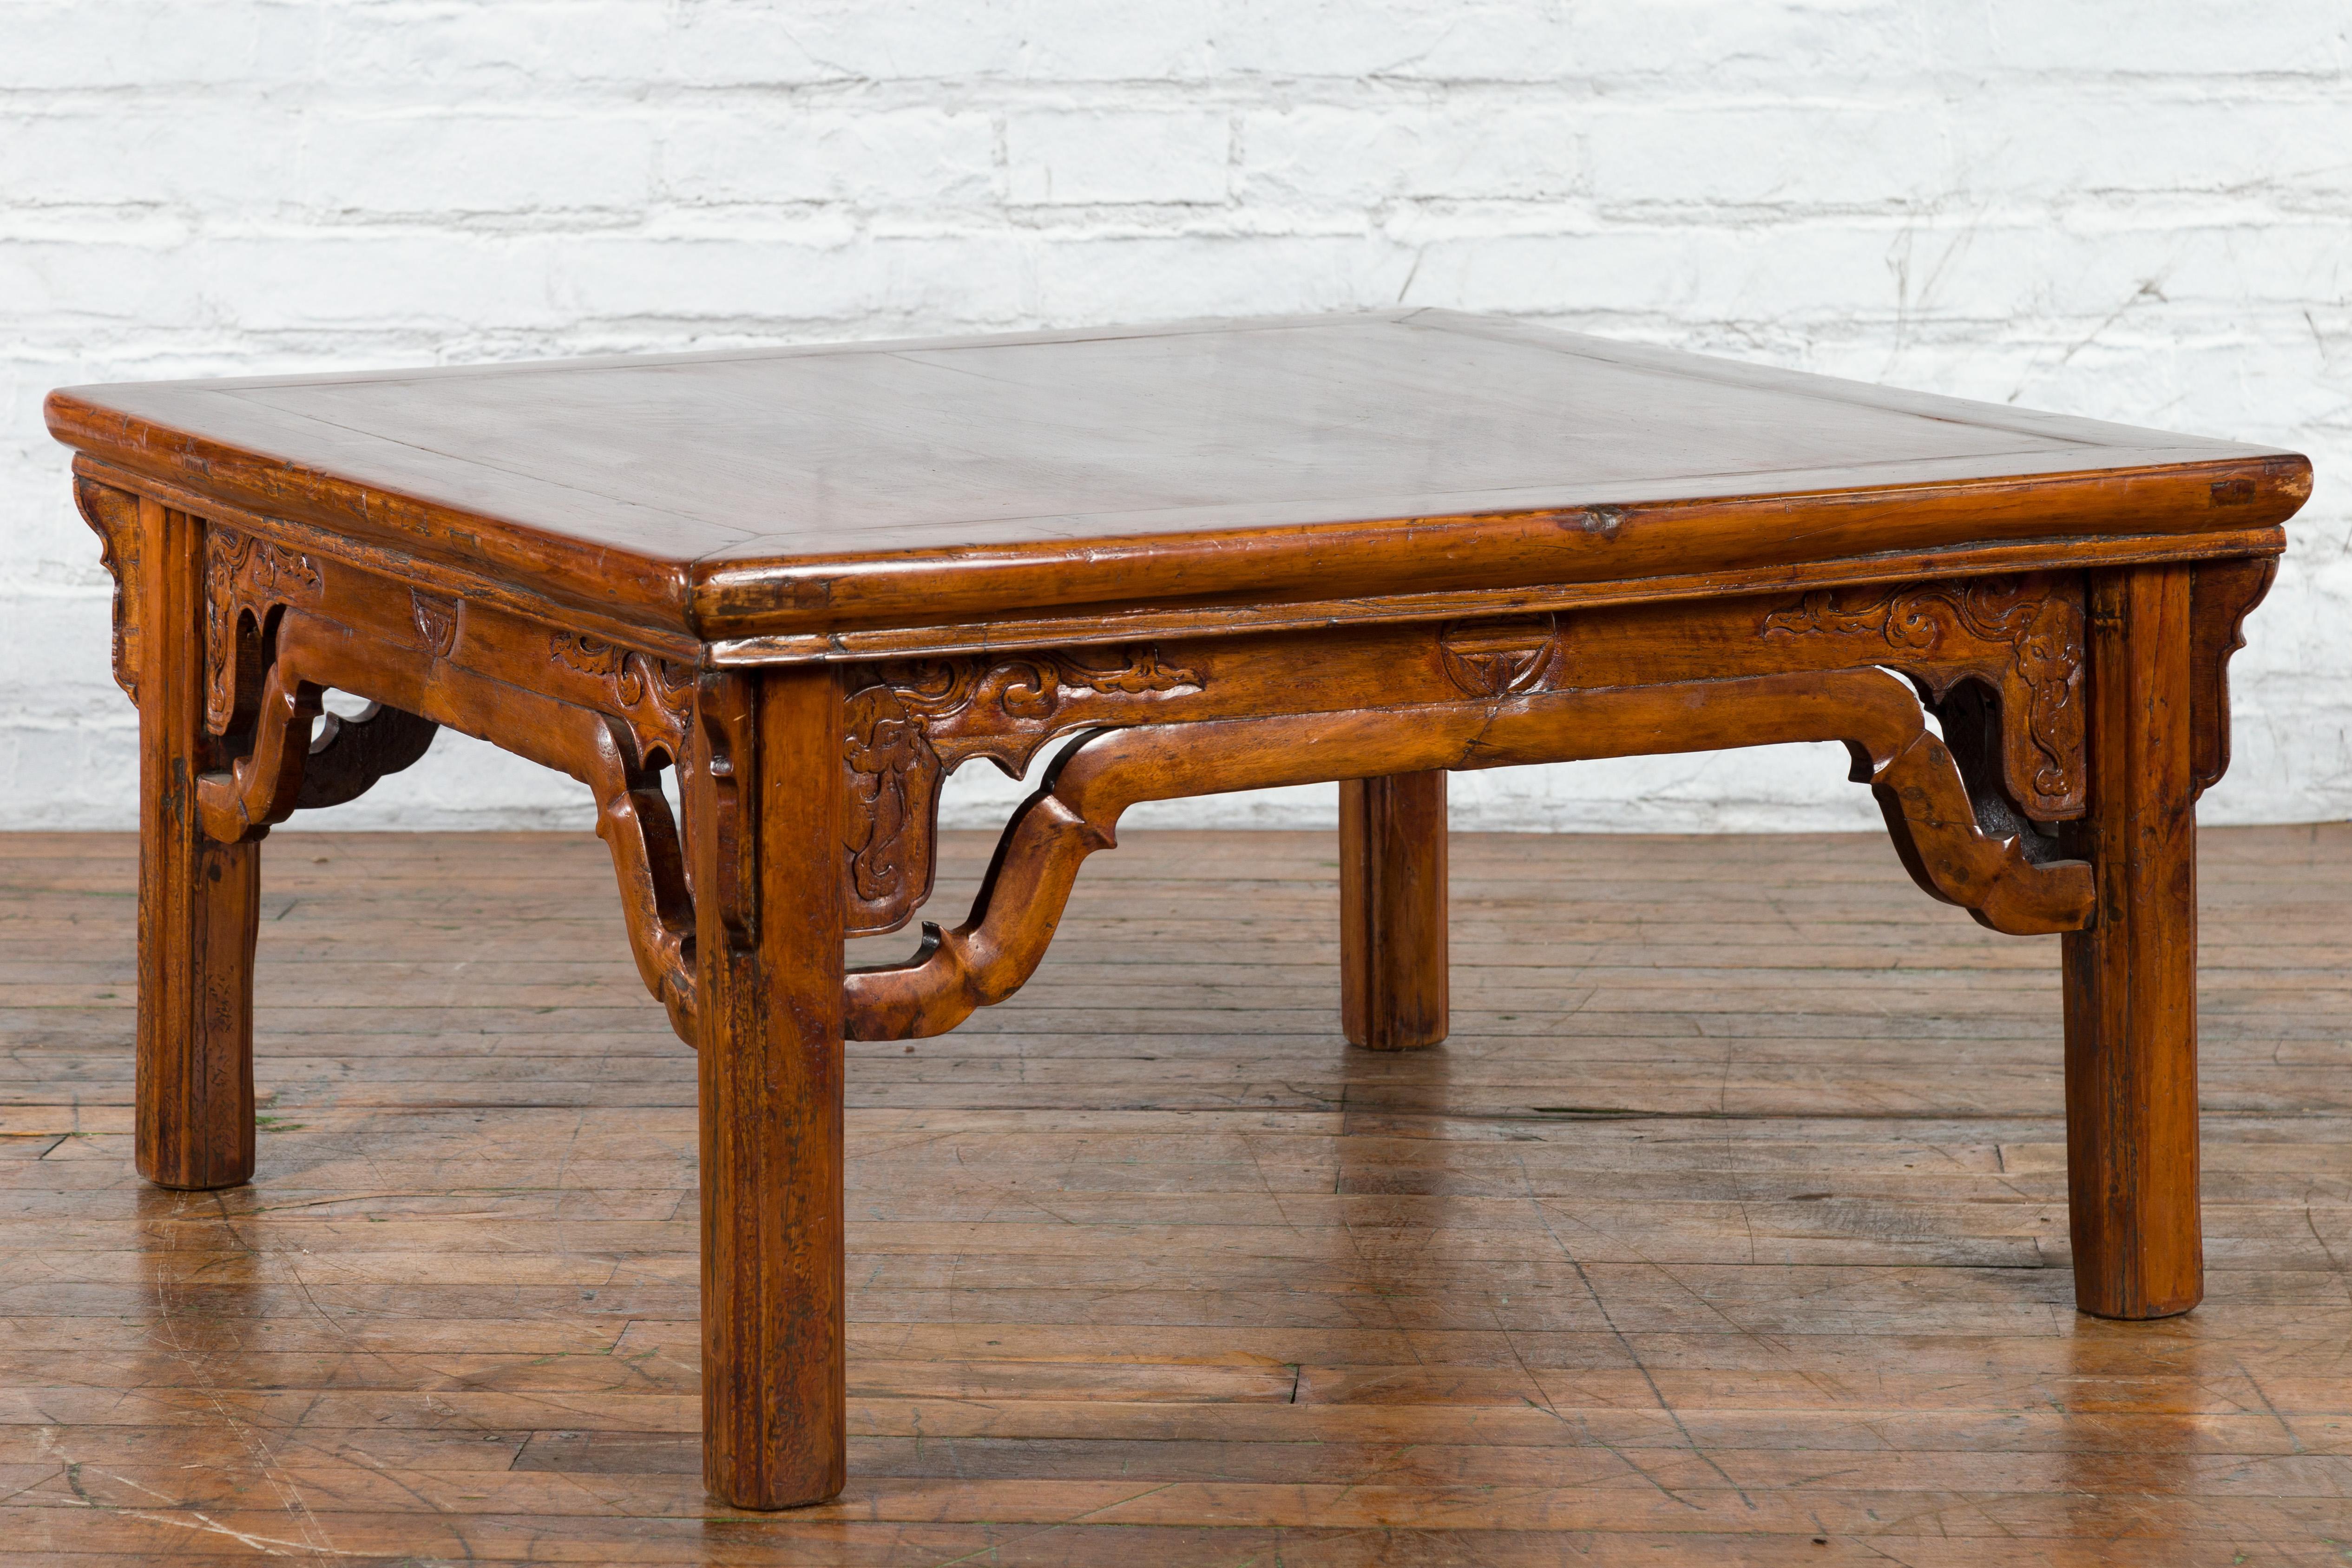 Chinese Qing Dynasty 19th Century Elmwood Coffee Table with Carved Apron For Sale 2